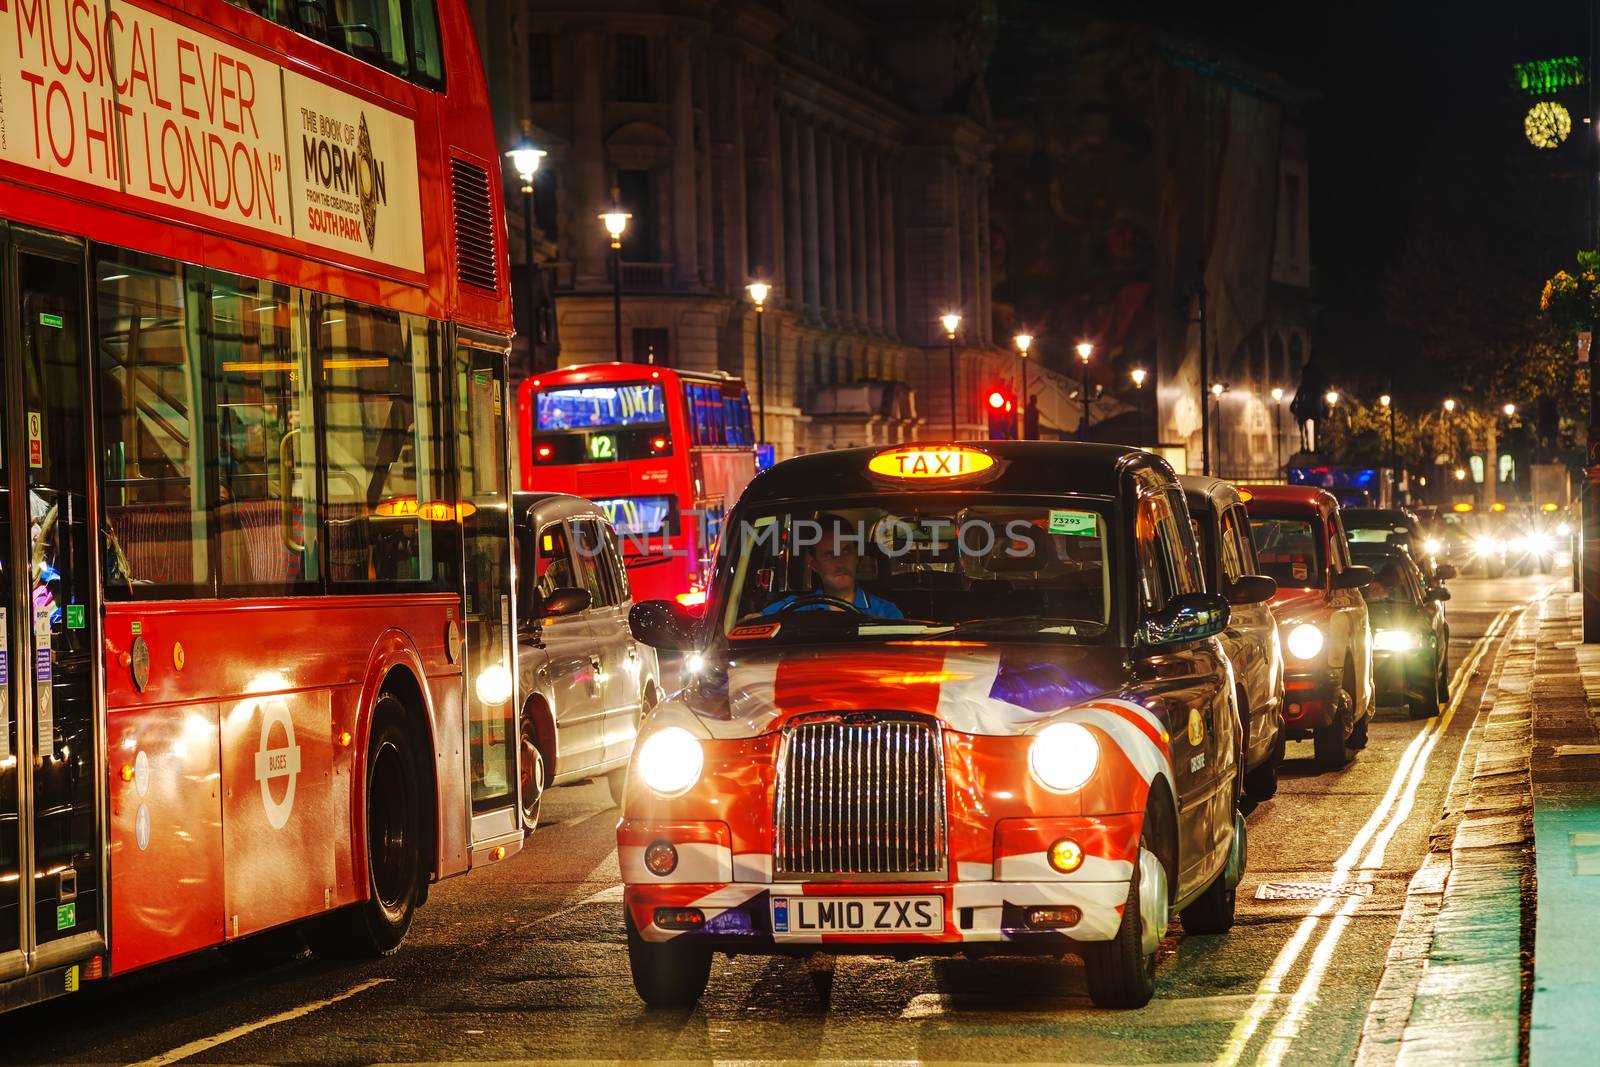 Famous taxi cab on a street in London by AndreyKr